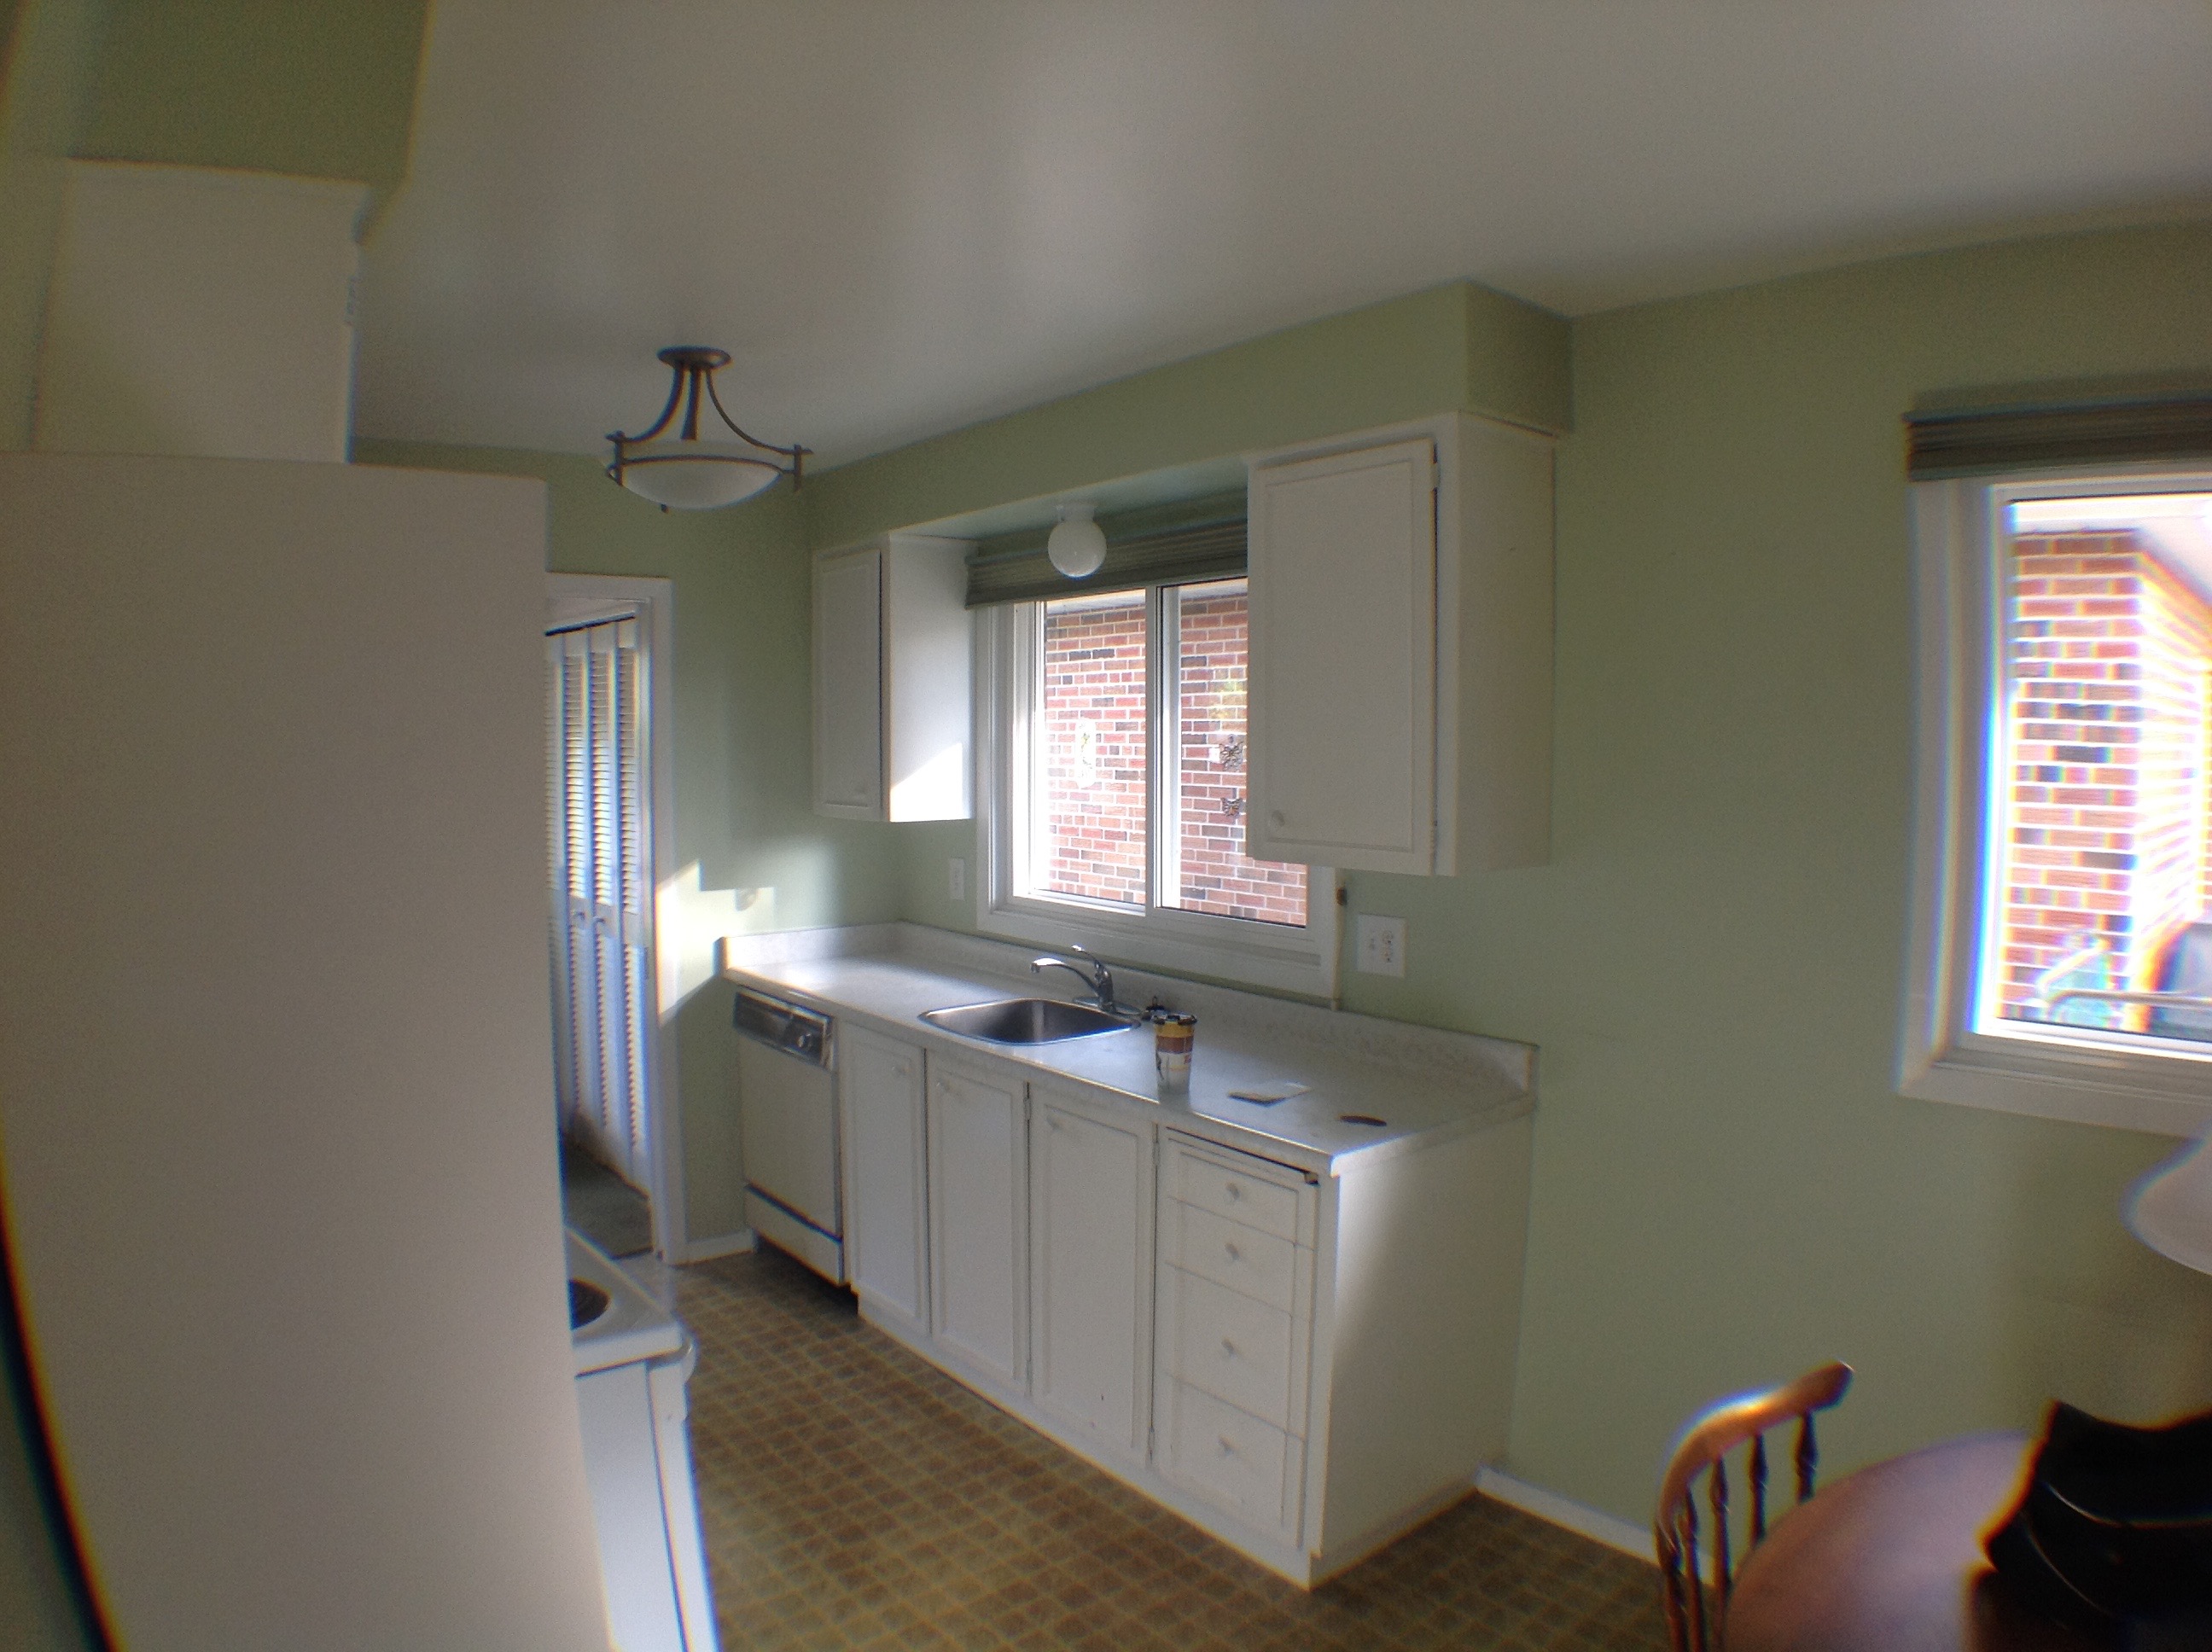 Before picture of a simple kitchen area